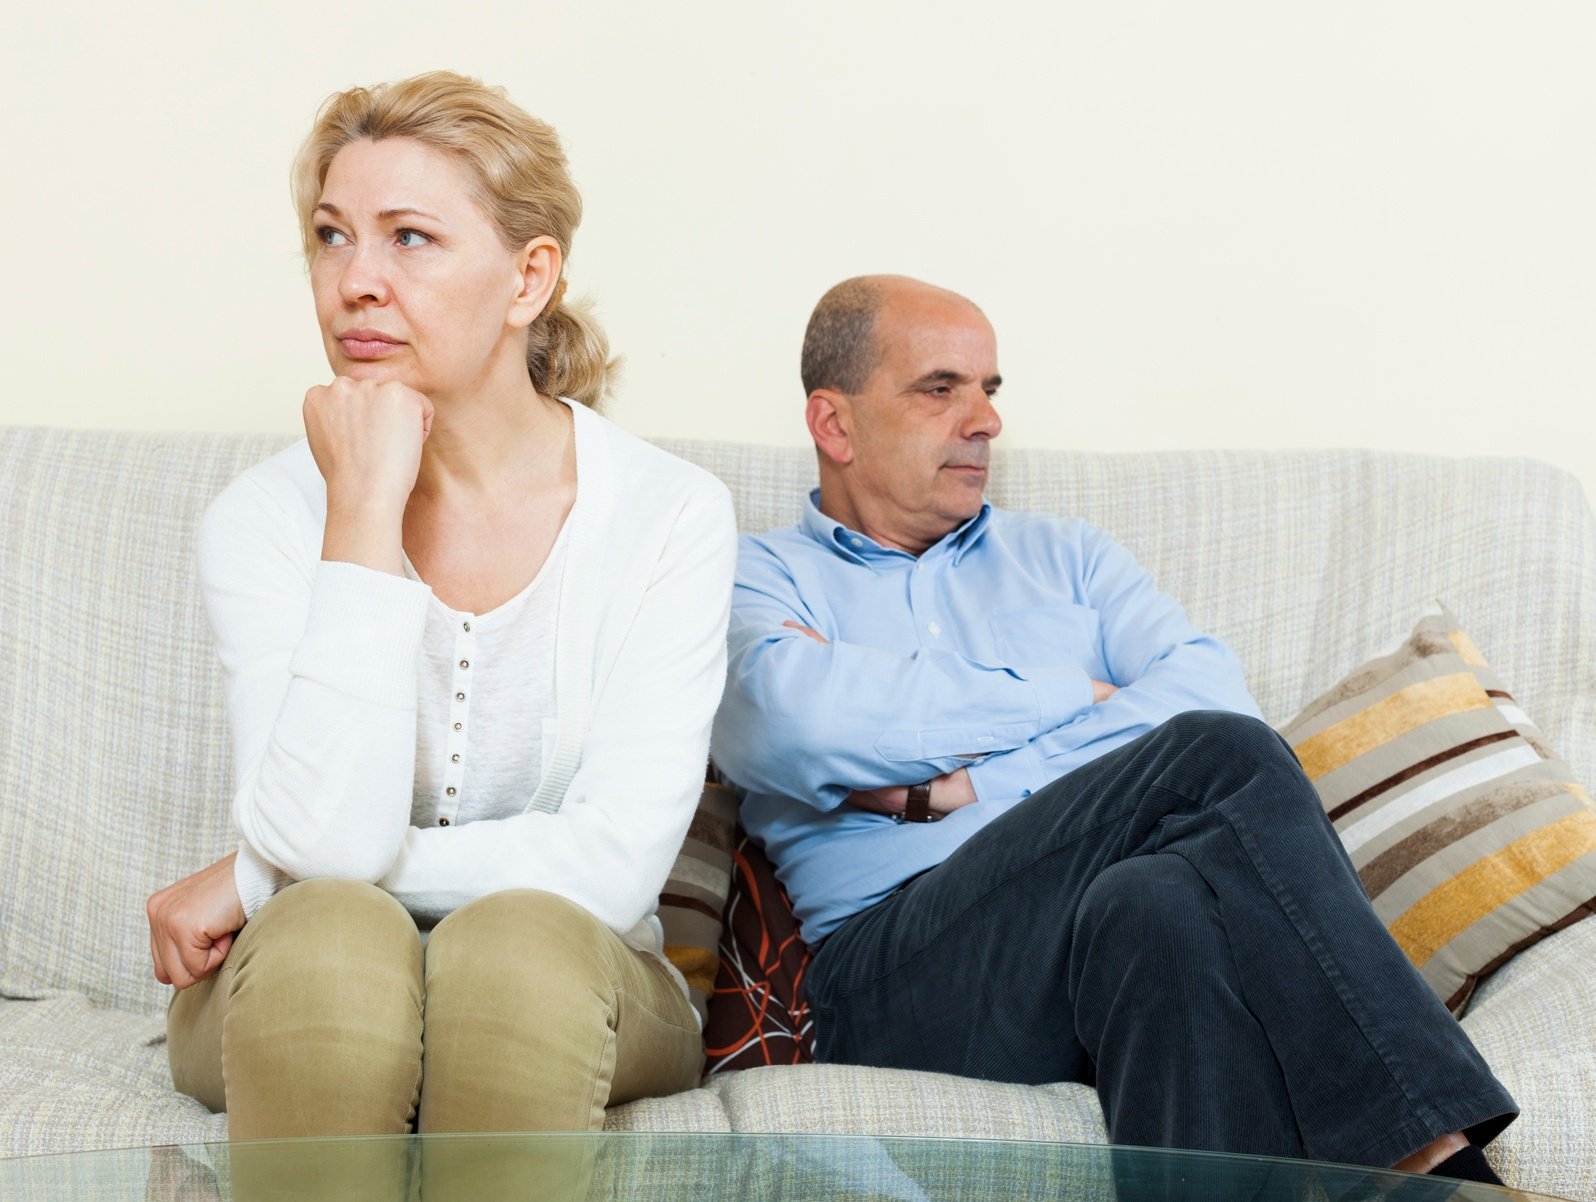 Four Reasons to Consider Collaborative Divorce If You’re Over 50​